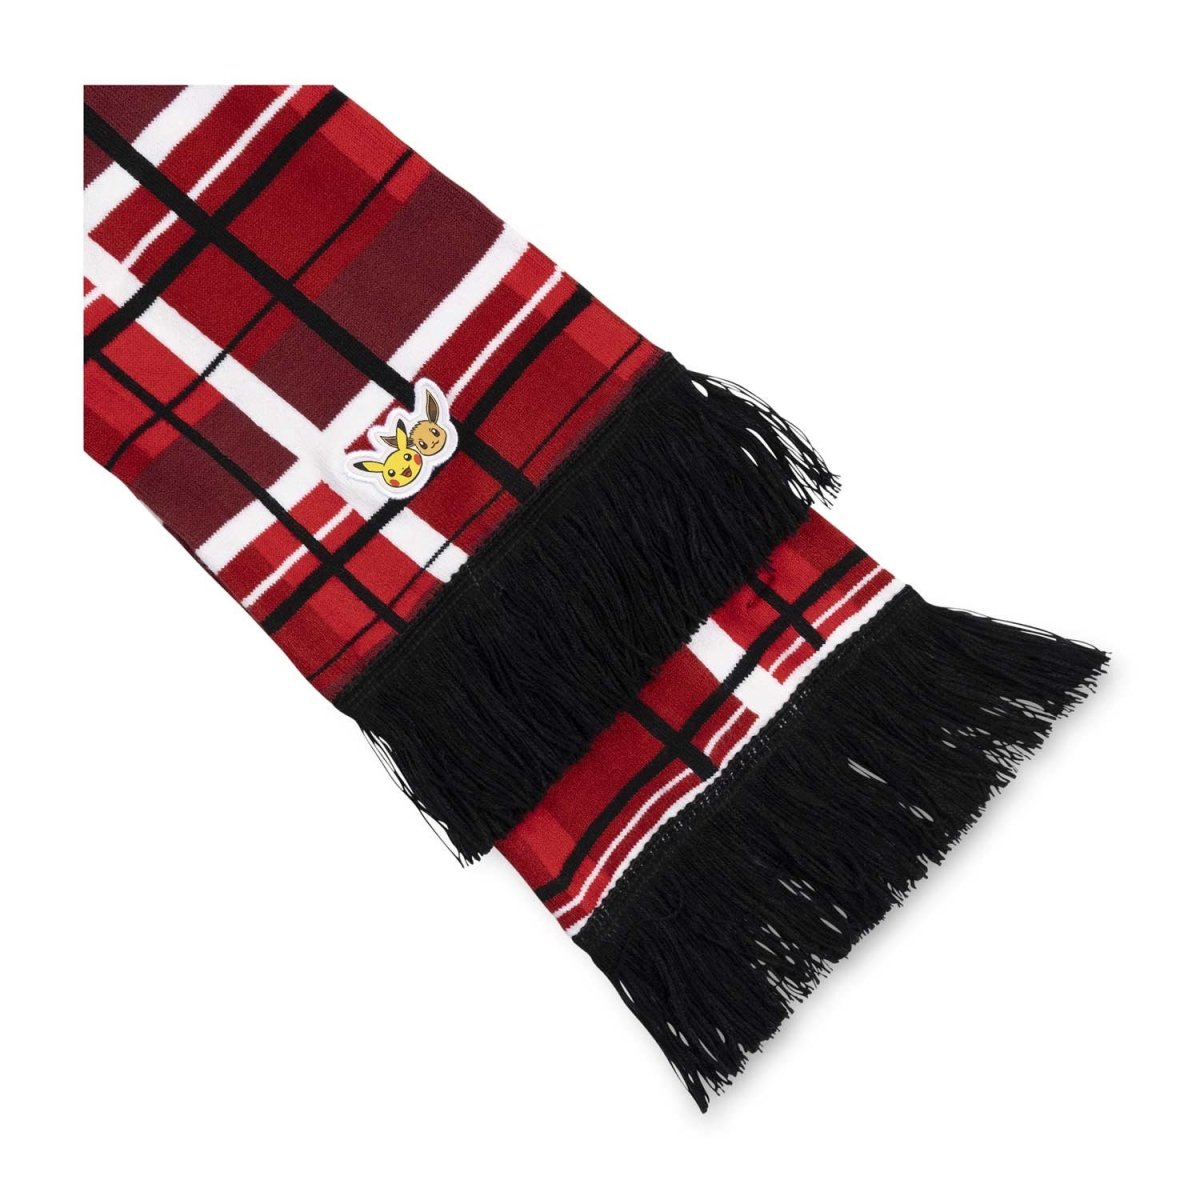 Pikachu & Eevee Red & Black Plaid Knit Scarf (One Size-Adult